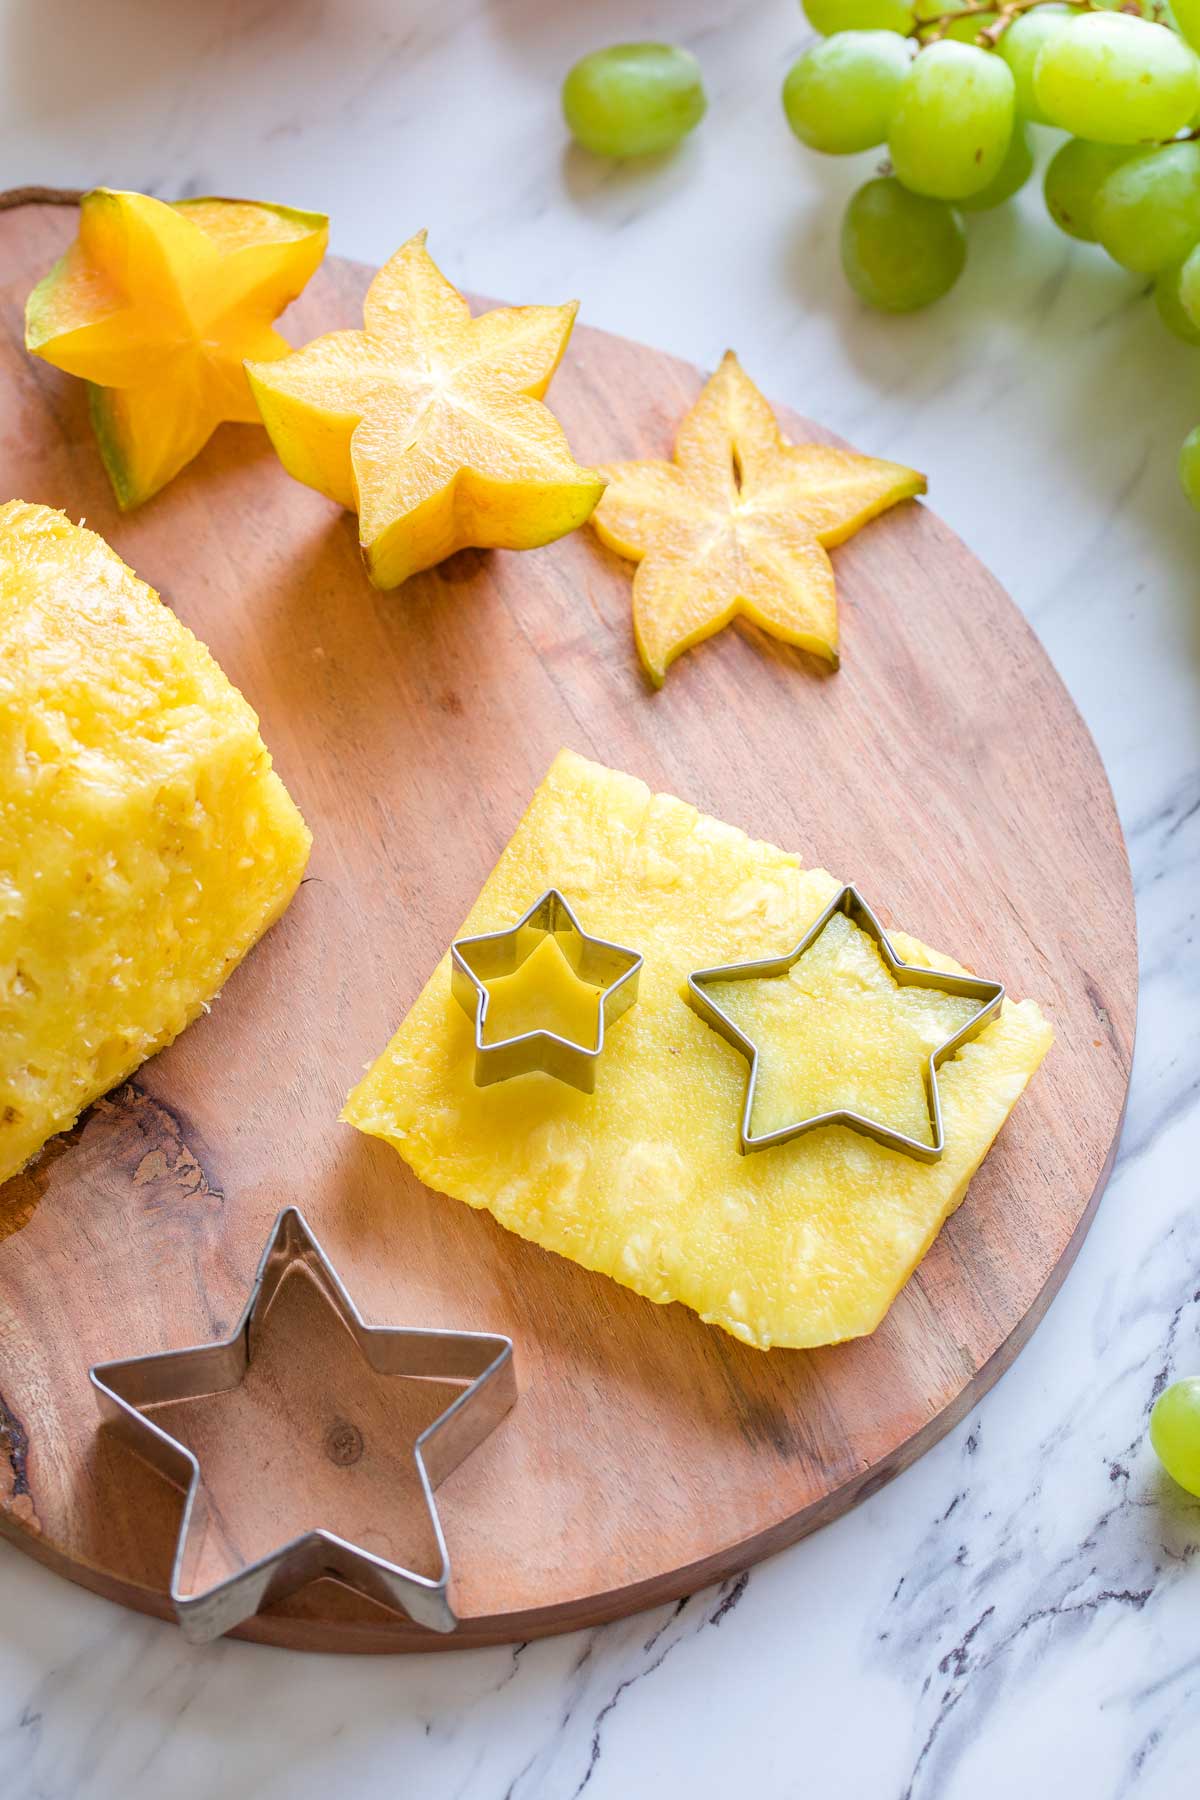 Star-shaped cookie cutters making stars from a plank of pineapple, with starfruit and green grapes alongside.